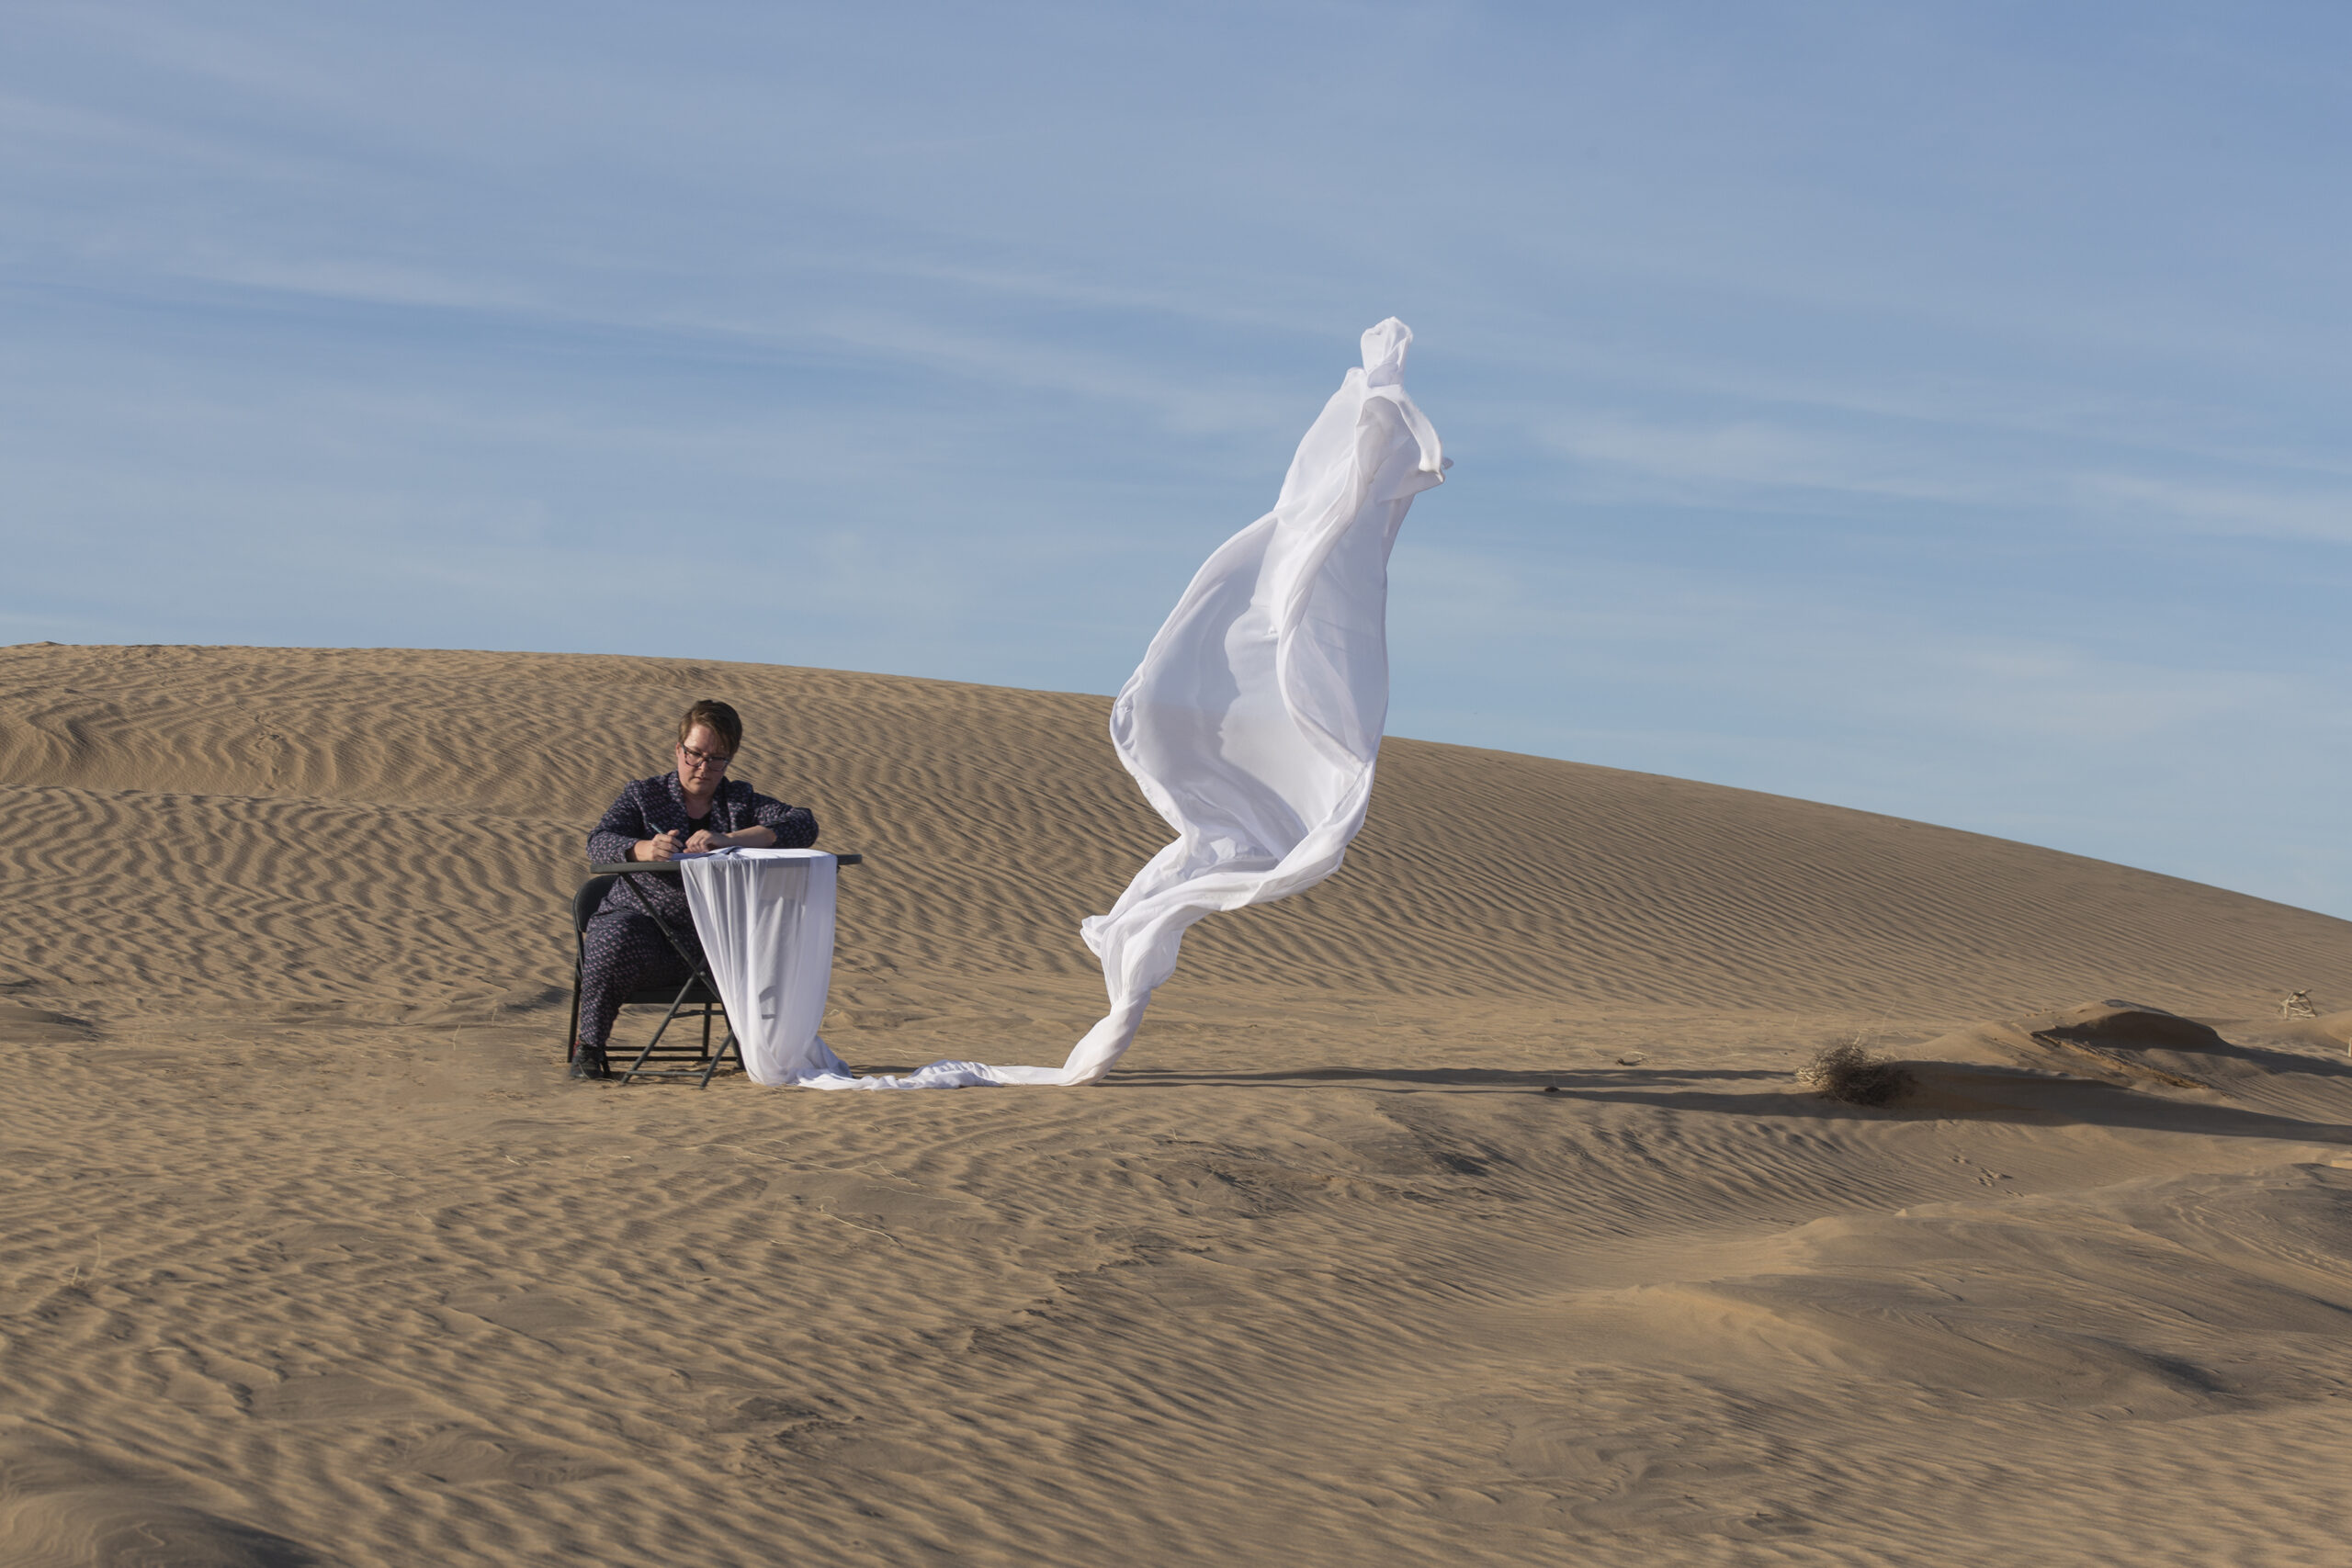 Tara sits on a sand dune, writing by hand. A piece of white fabric flows away from the paper and flies in the wind. Tara is wearing a patterned suit.